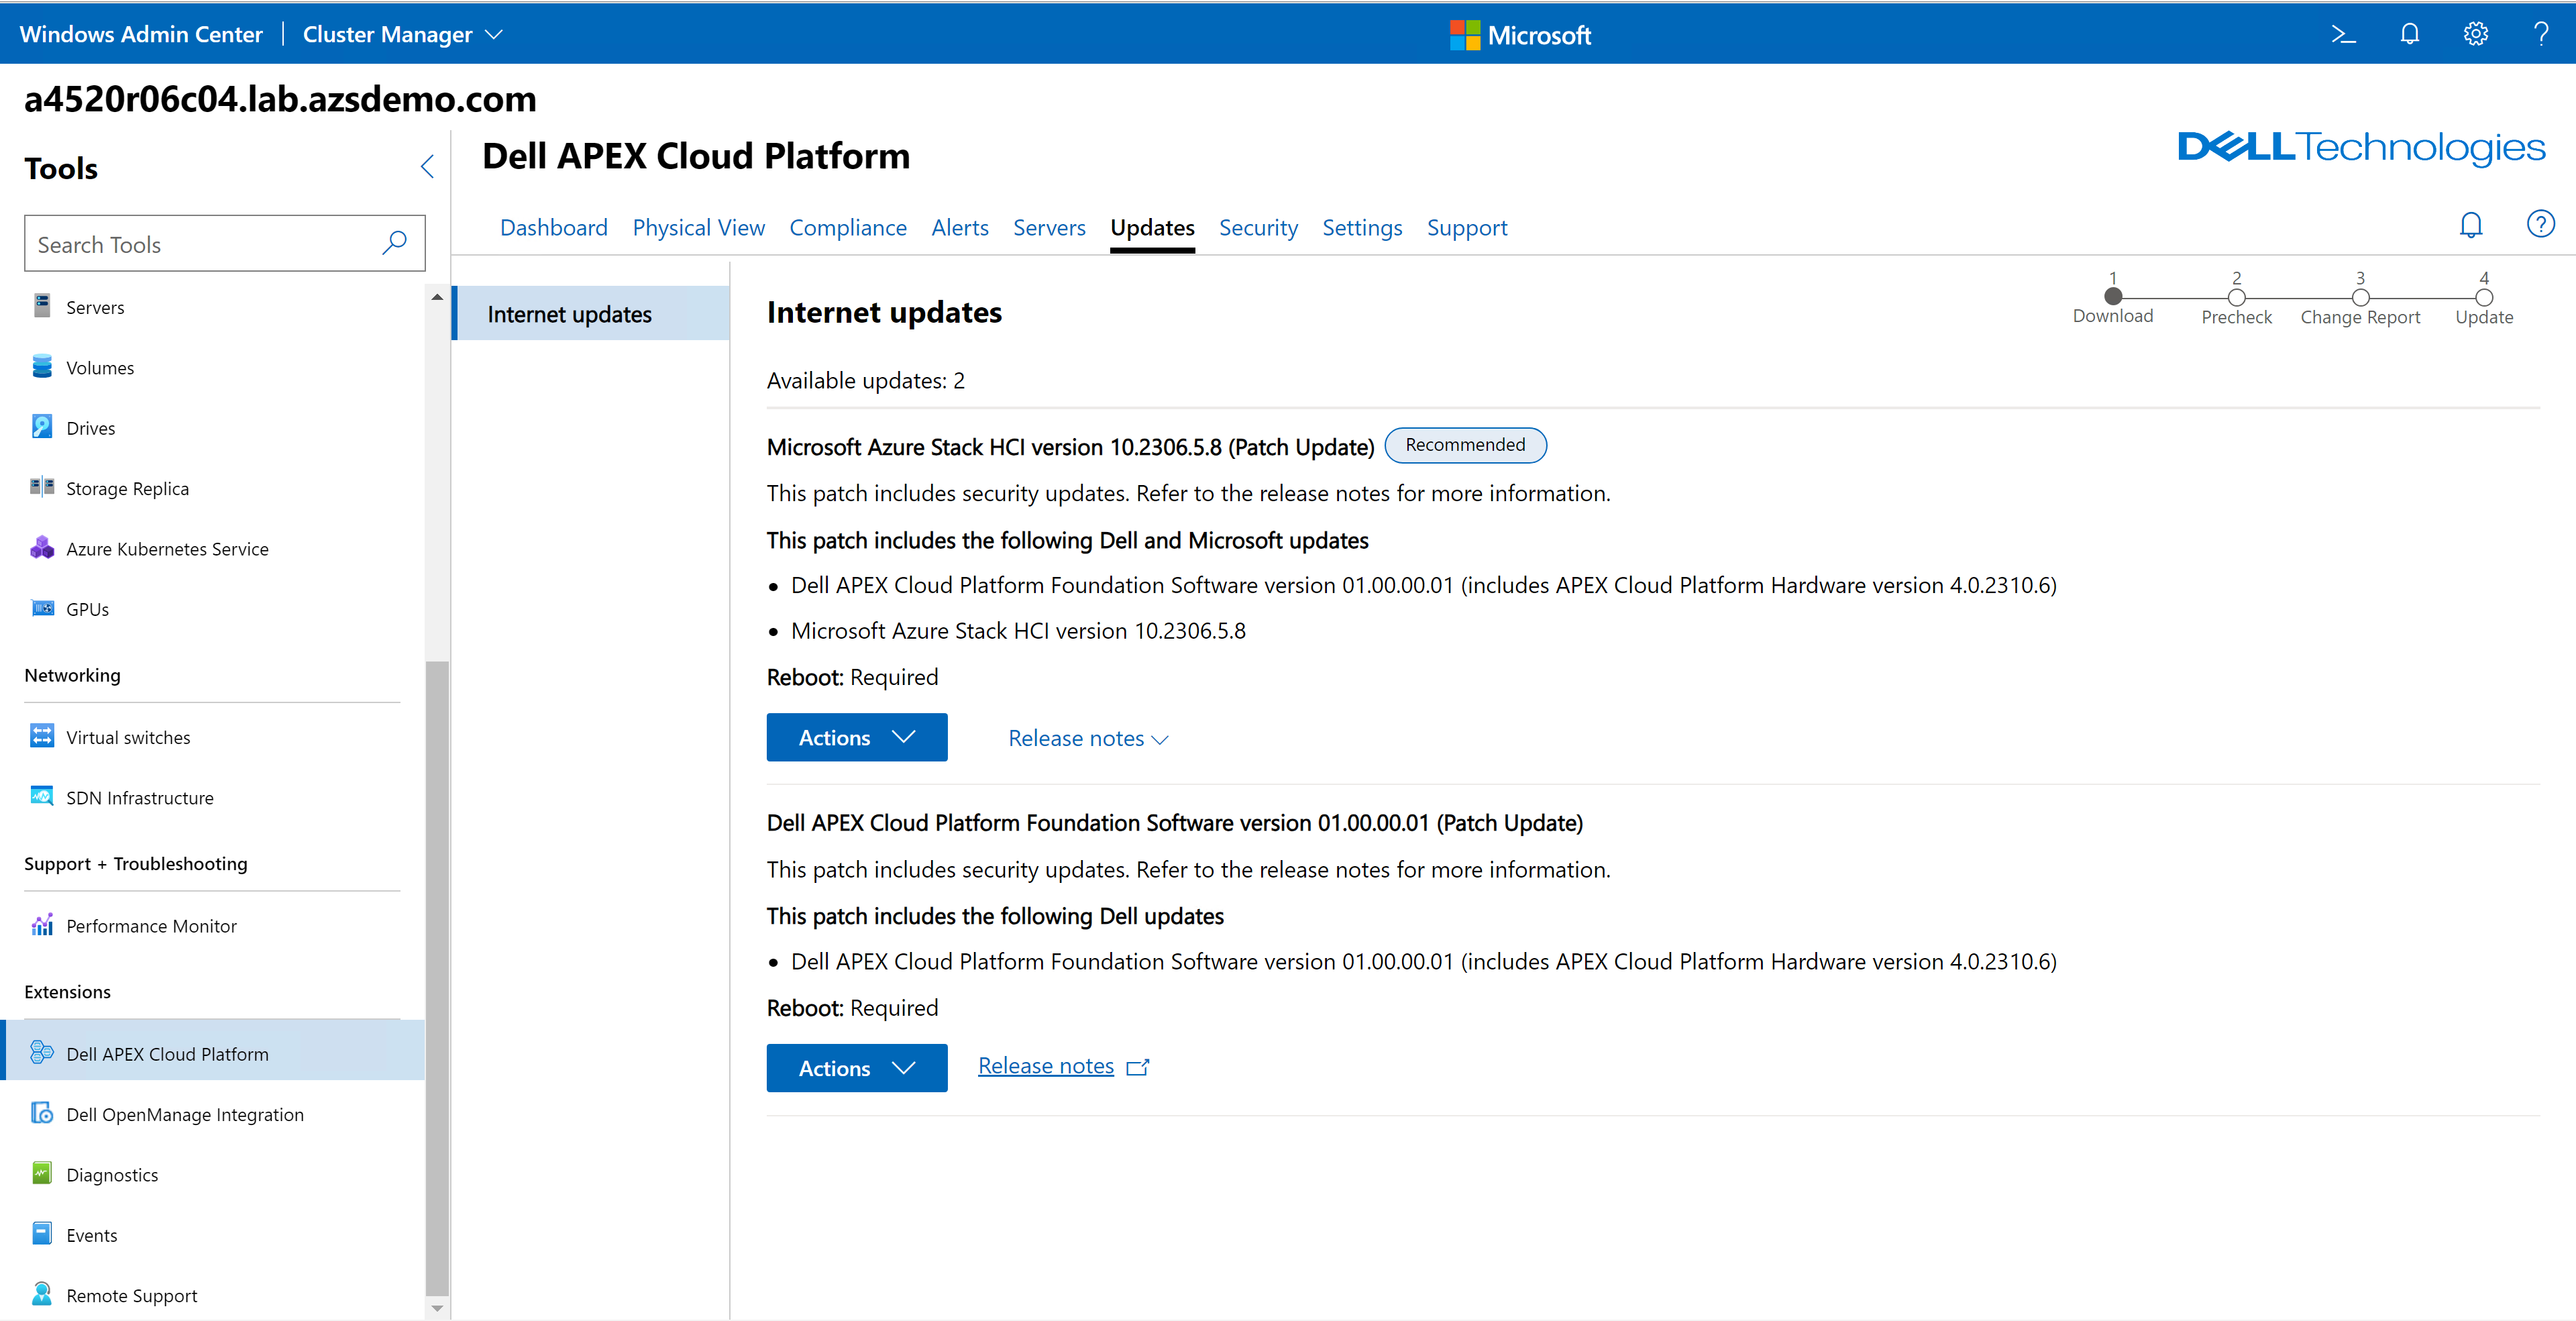 This is a screen shot depicting how bundles appear within the APEX Cloud Platform extension in Windows Admin Center